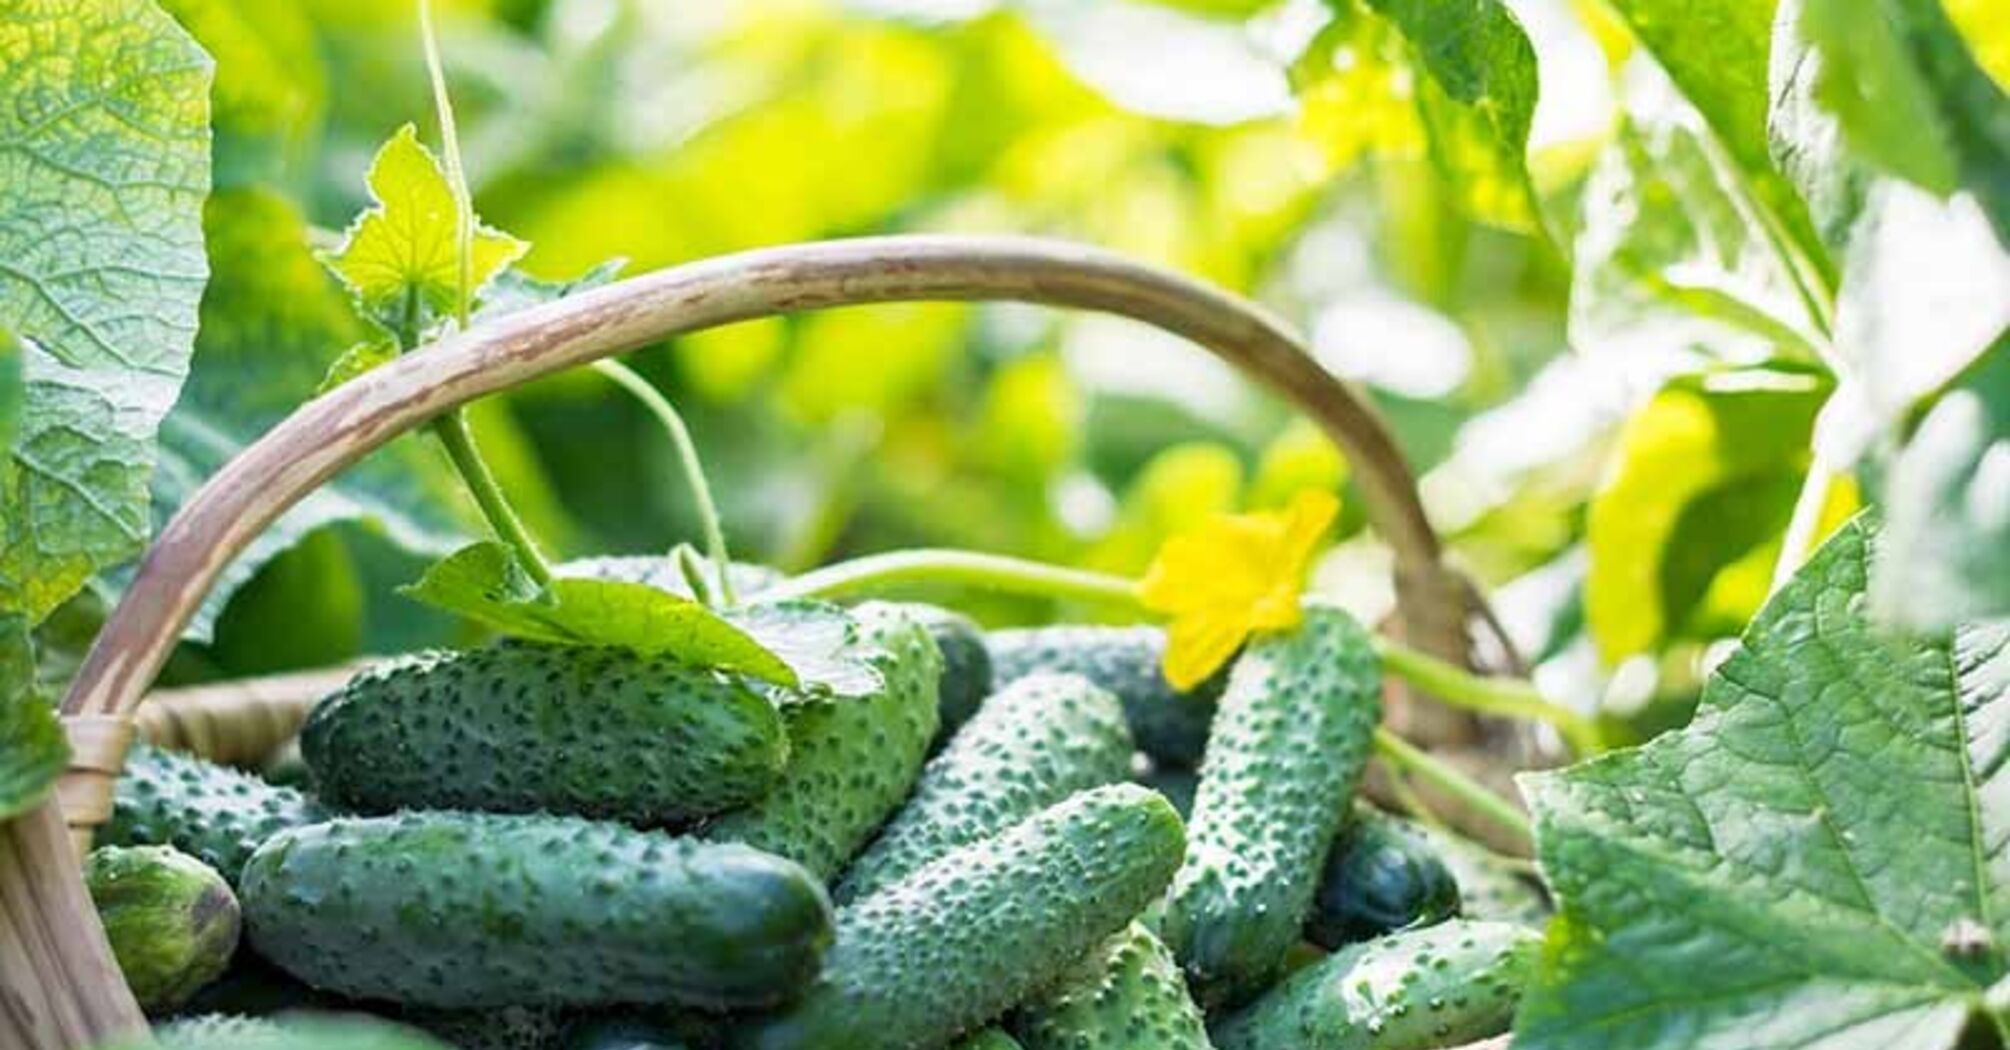 How to get an early cucumber harvest